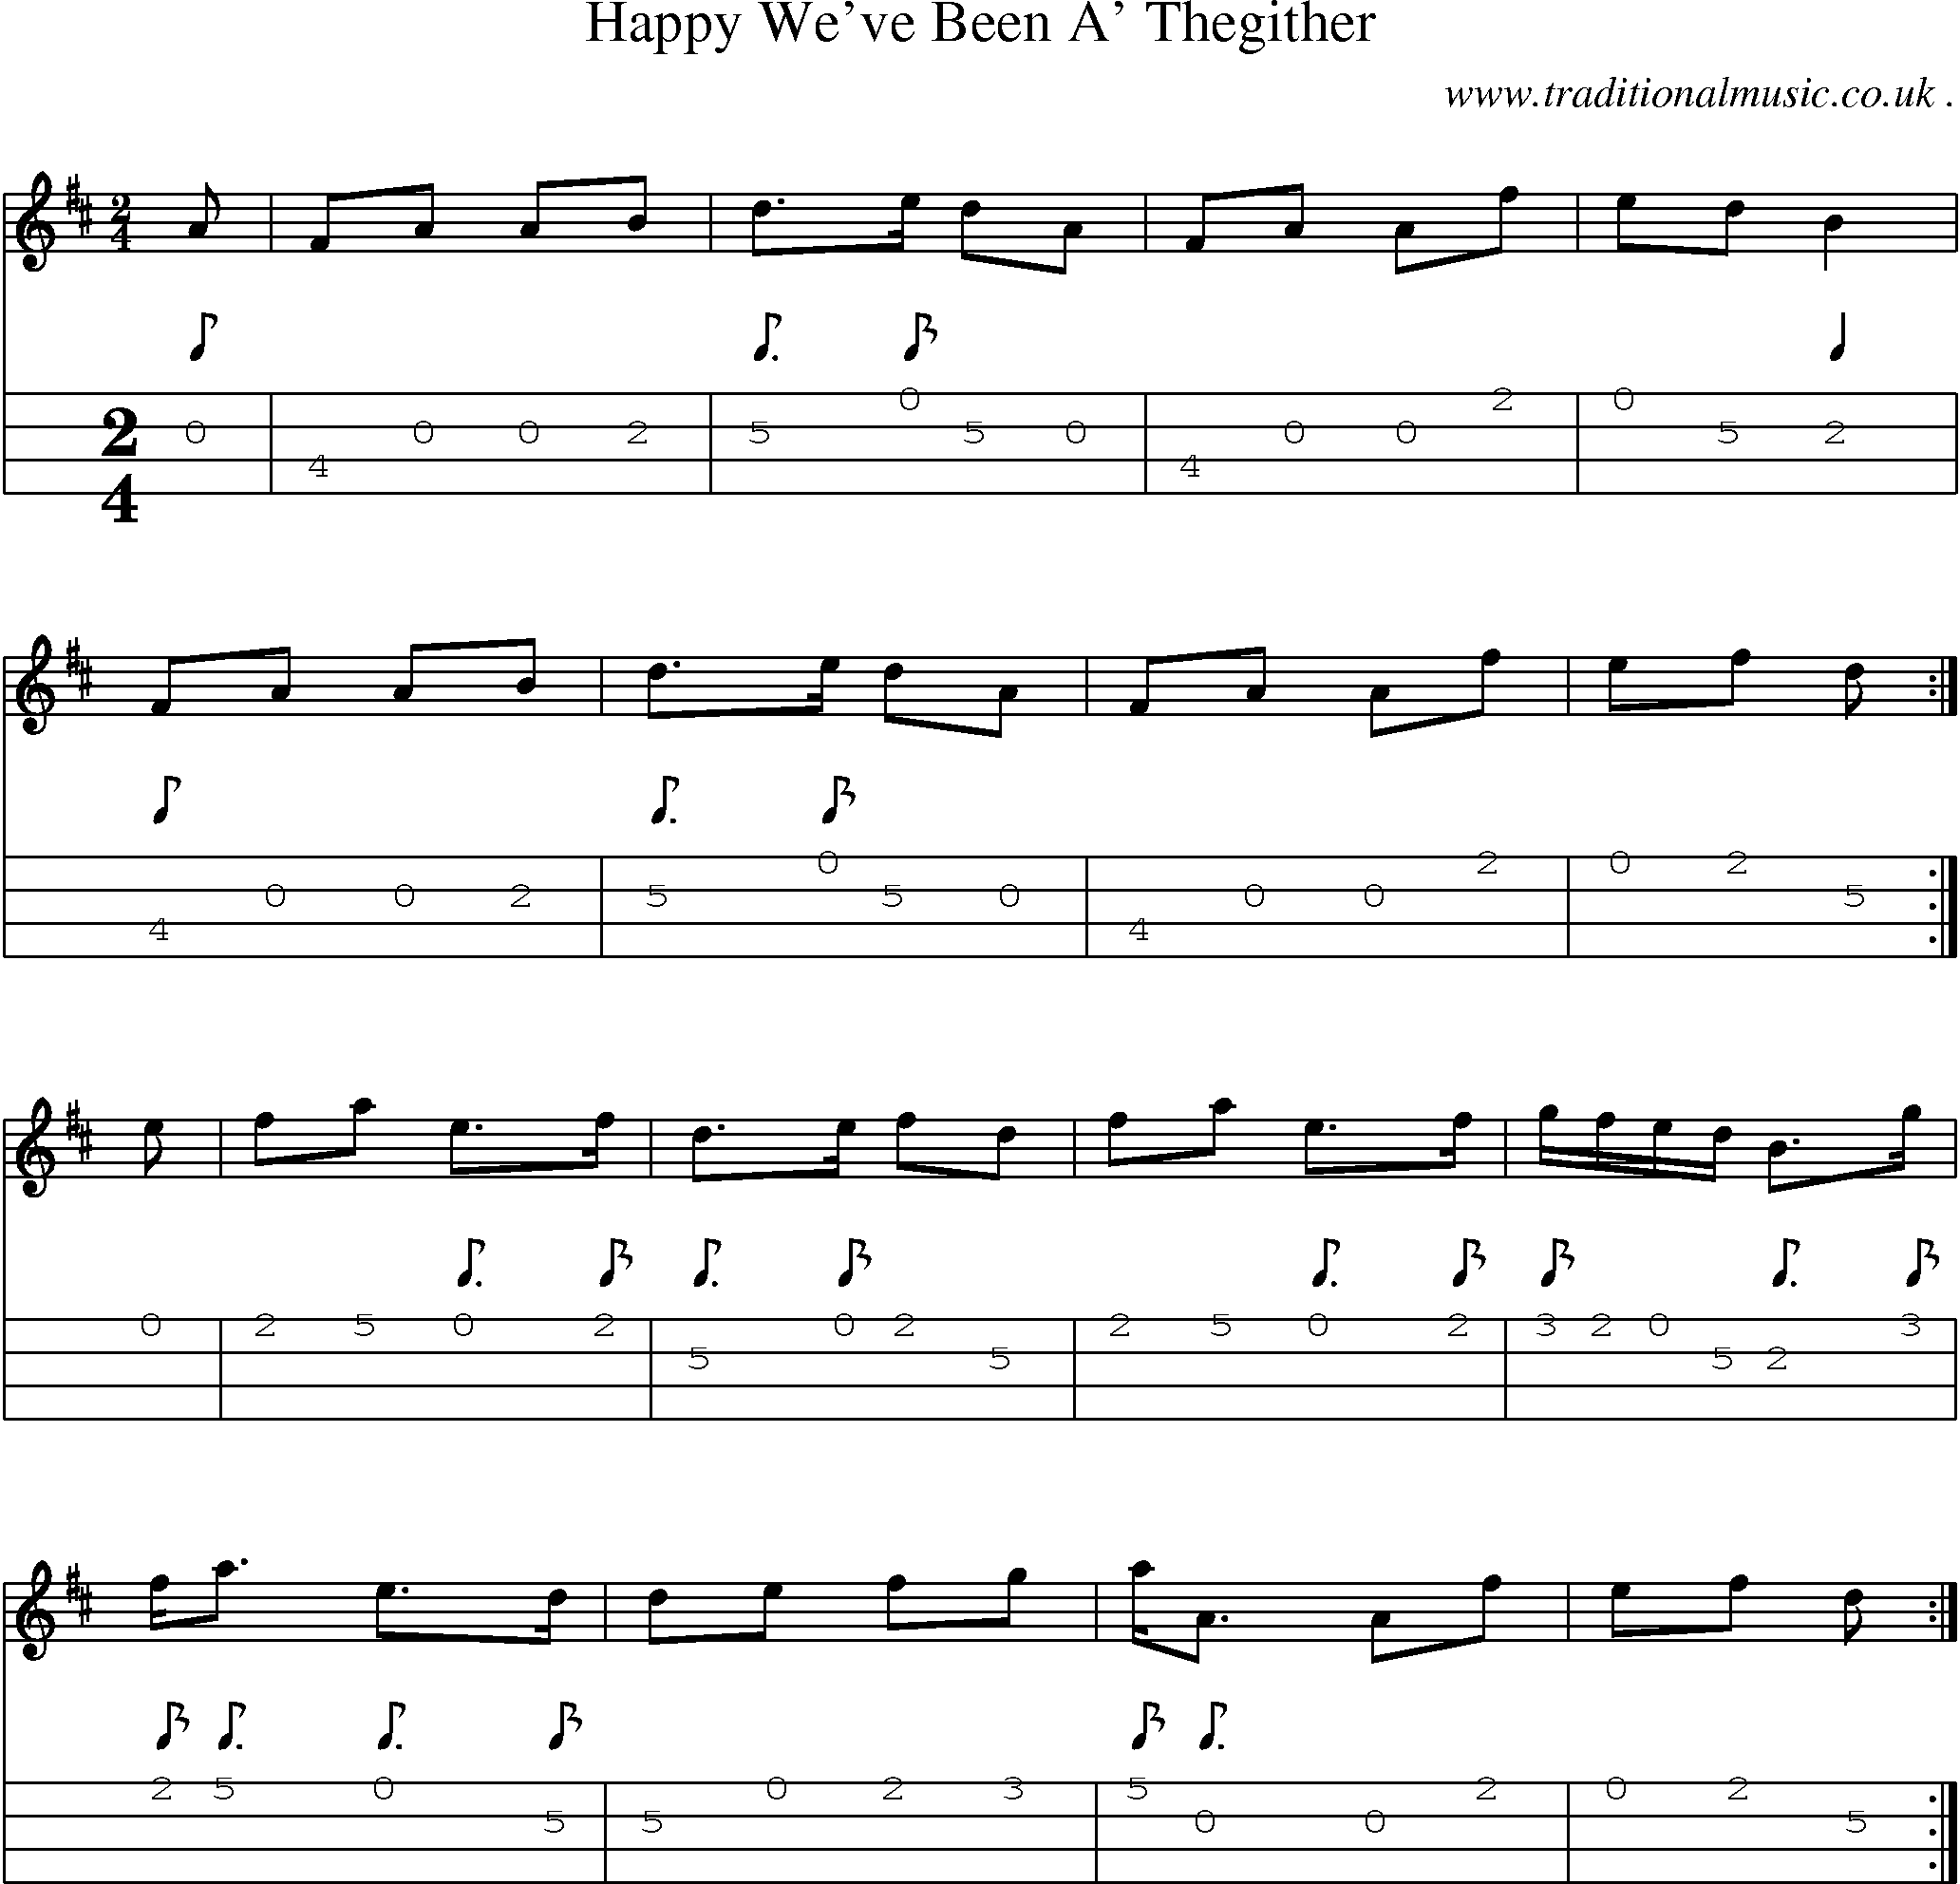 Sheet-music  score, Chords and Mandolin Tabs for Happy Weve Been A Thegither